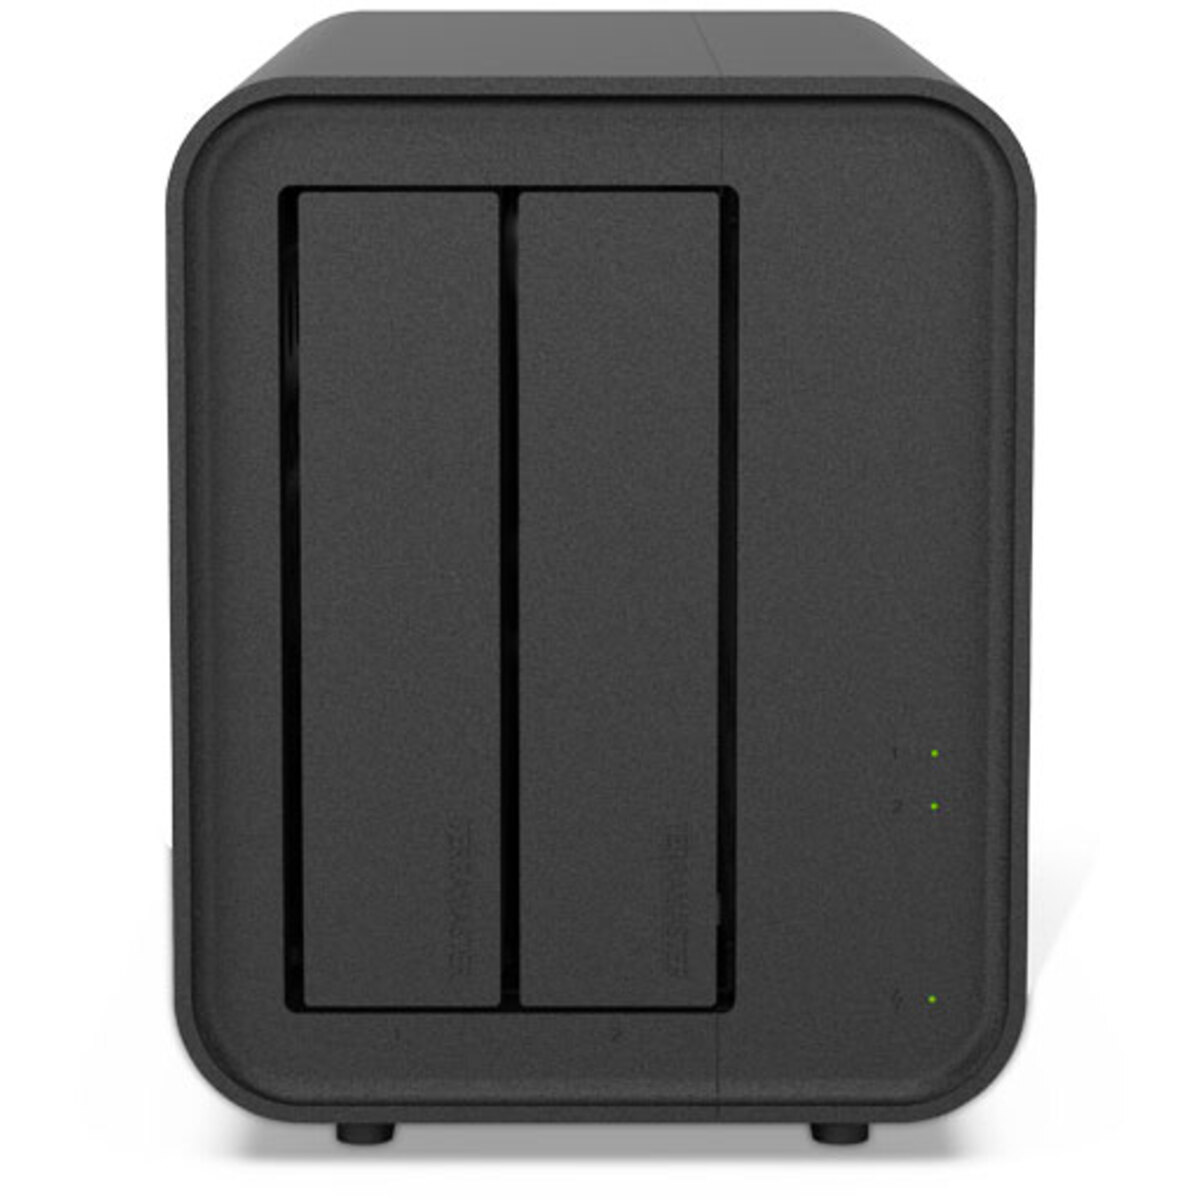 TerraMaster D5 Hybrid 48tb 2-Bay Desktop Multimedia / Power User / Business DAS - Direct Attached Storage Device 2x24tb Seagate IronWolf Pro ST24000NT002 3.5 7200rpm SATA 6Gb/s HDD NAS Class Drives Installed - Burn-In Tested D5 Hybrid